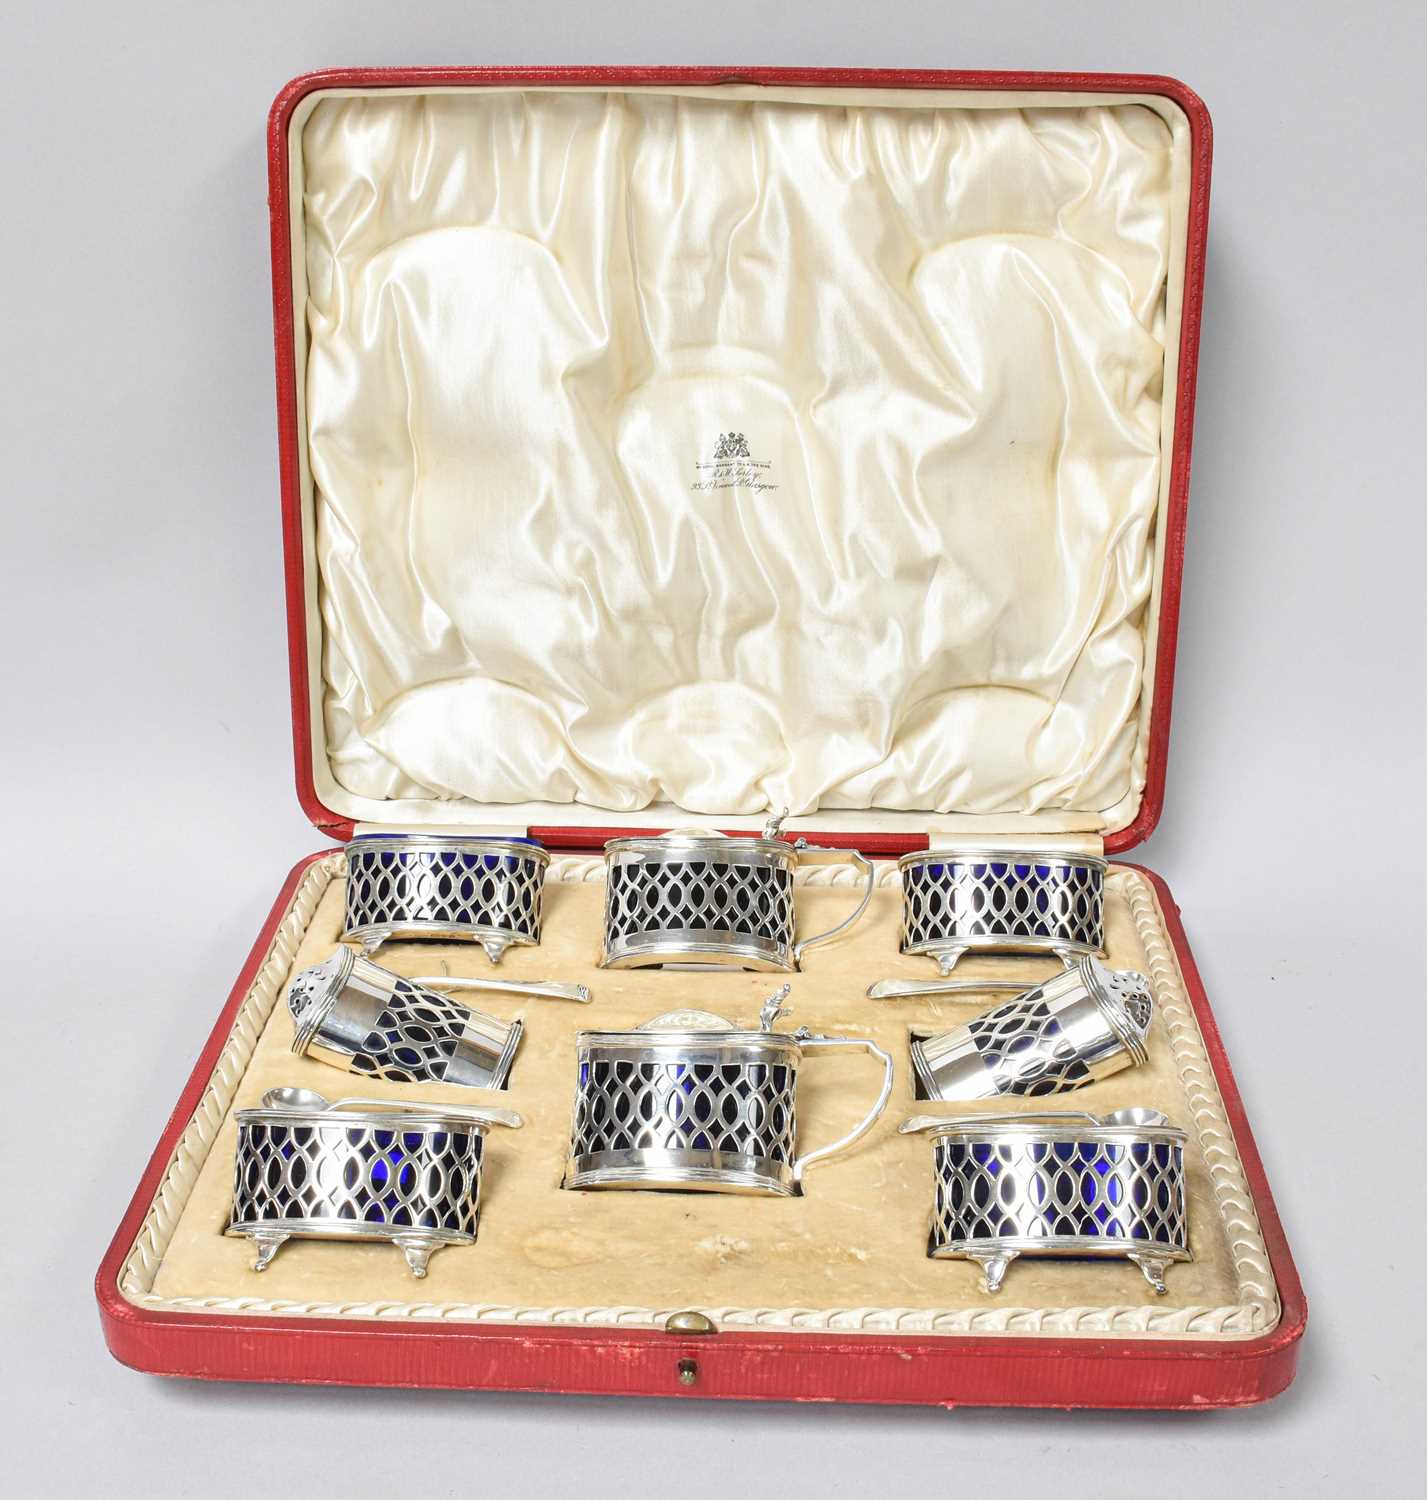 A Cased Edward VII Silver Condiment-Set, by William Henry Stokes and Arthur George Ireland, Chester,